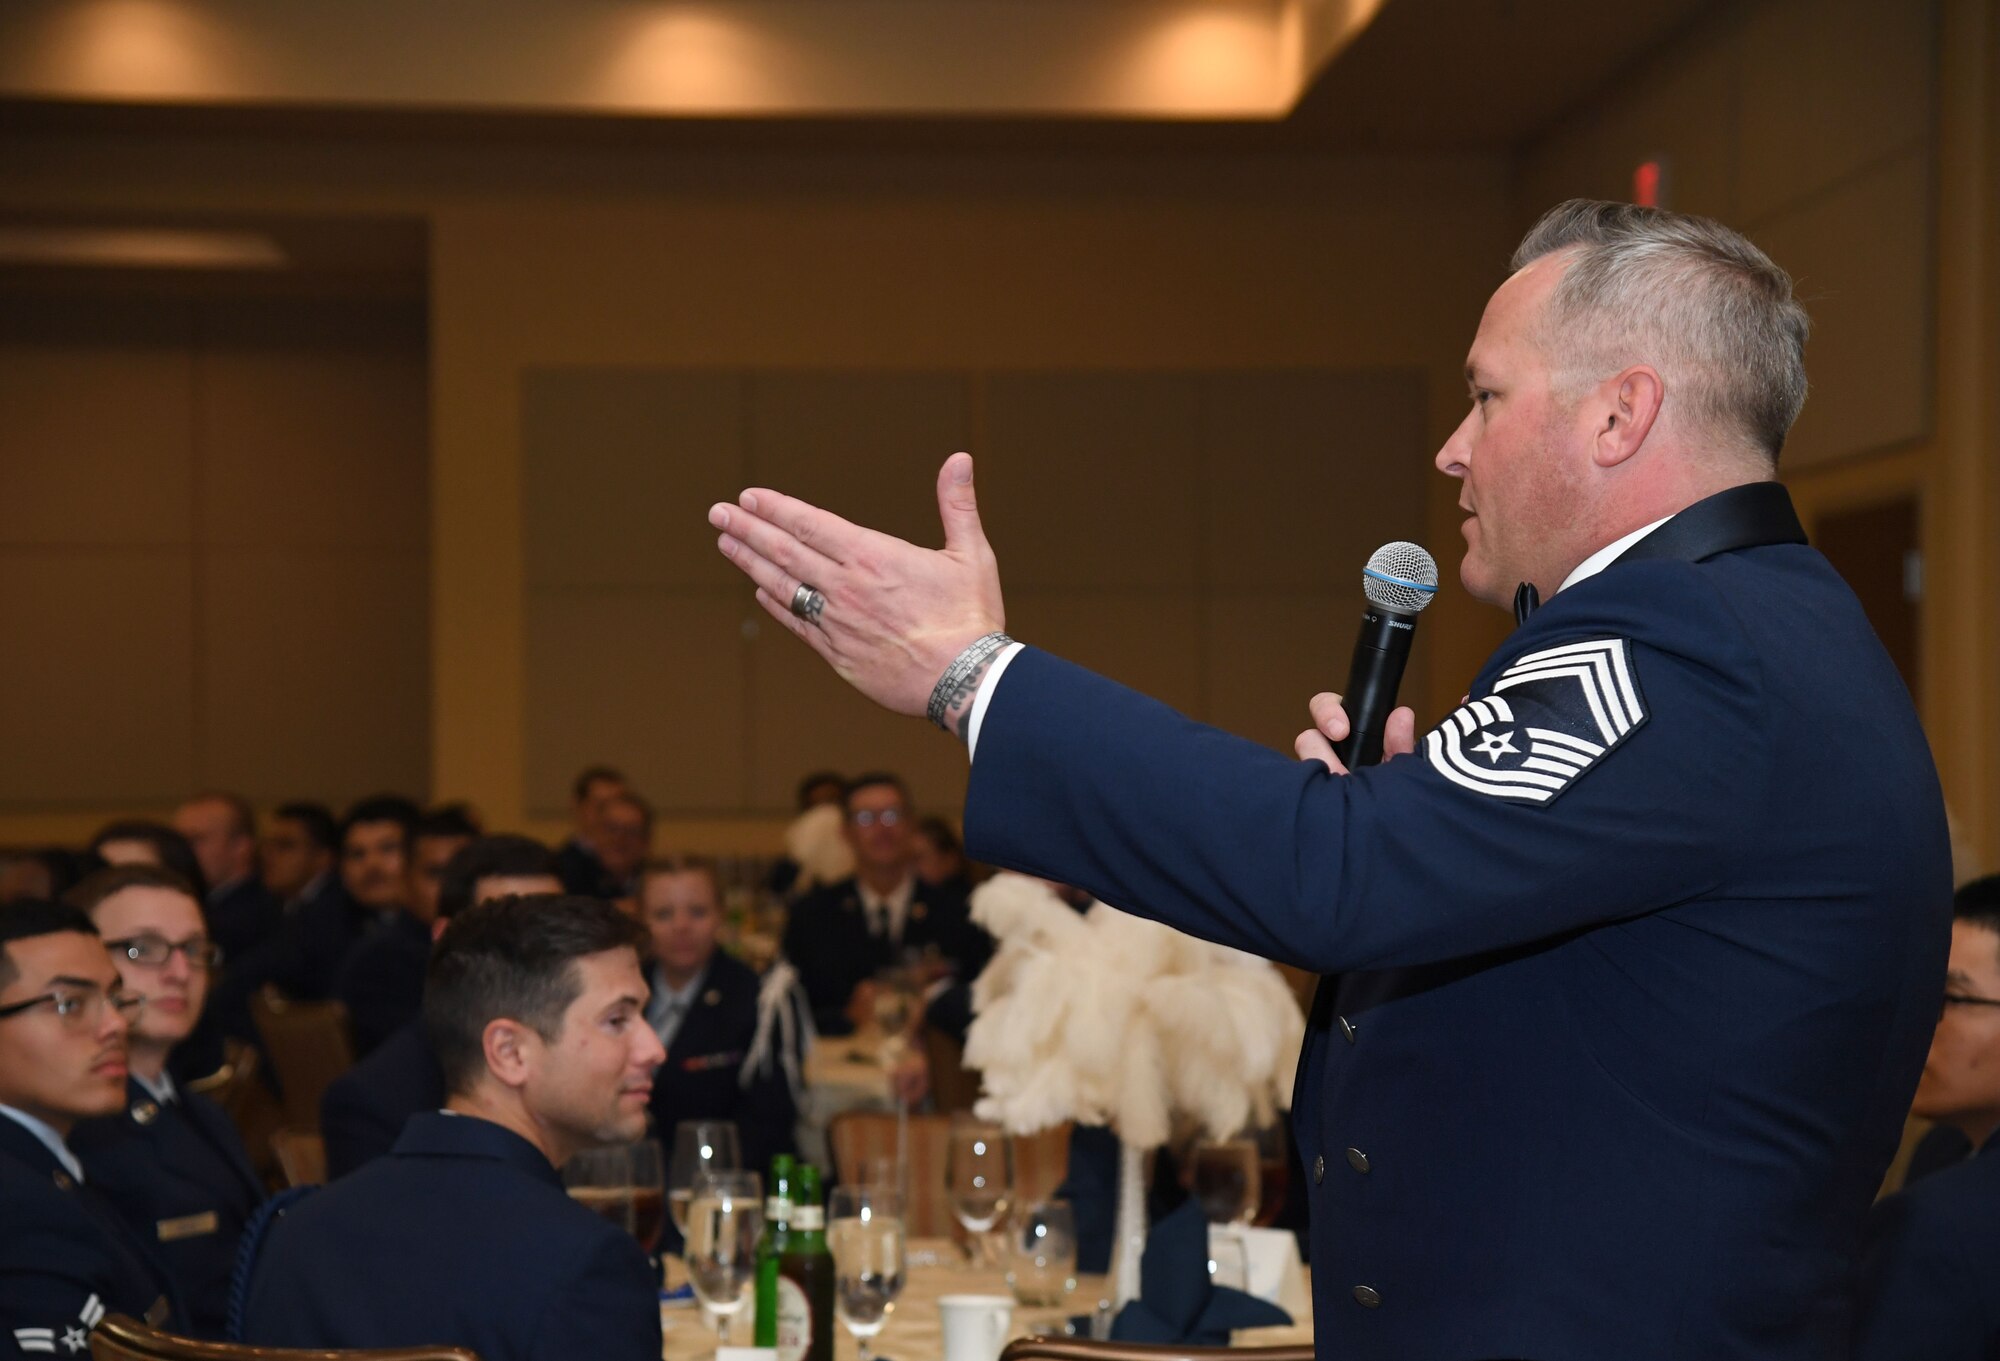 U.S. Air Force Chief Master Sgt. Jeremy Phillips, 81st Training Group senior enlisted leader, delivers remarks during the 81st Training Group Airman's Ball inside the Bay Breeze Event Center at Keesler Air Force Base, Mississippi, Sept. 30, 2022. The event was geared toward Airmen in training on how to participate and act during a formal military ball so they can feel confident in their abilities when arriving at their follow-on locations. The Airmen served in key positions throughout the ball such as emcees, color guard, POW/MIA table ceremony, national anthem singer and the invocation. (U.S. Air Force photo by Kemberly Groue)